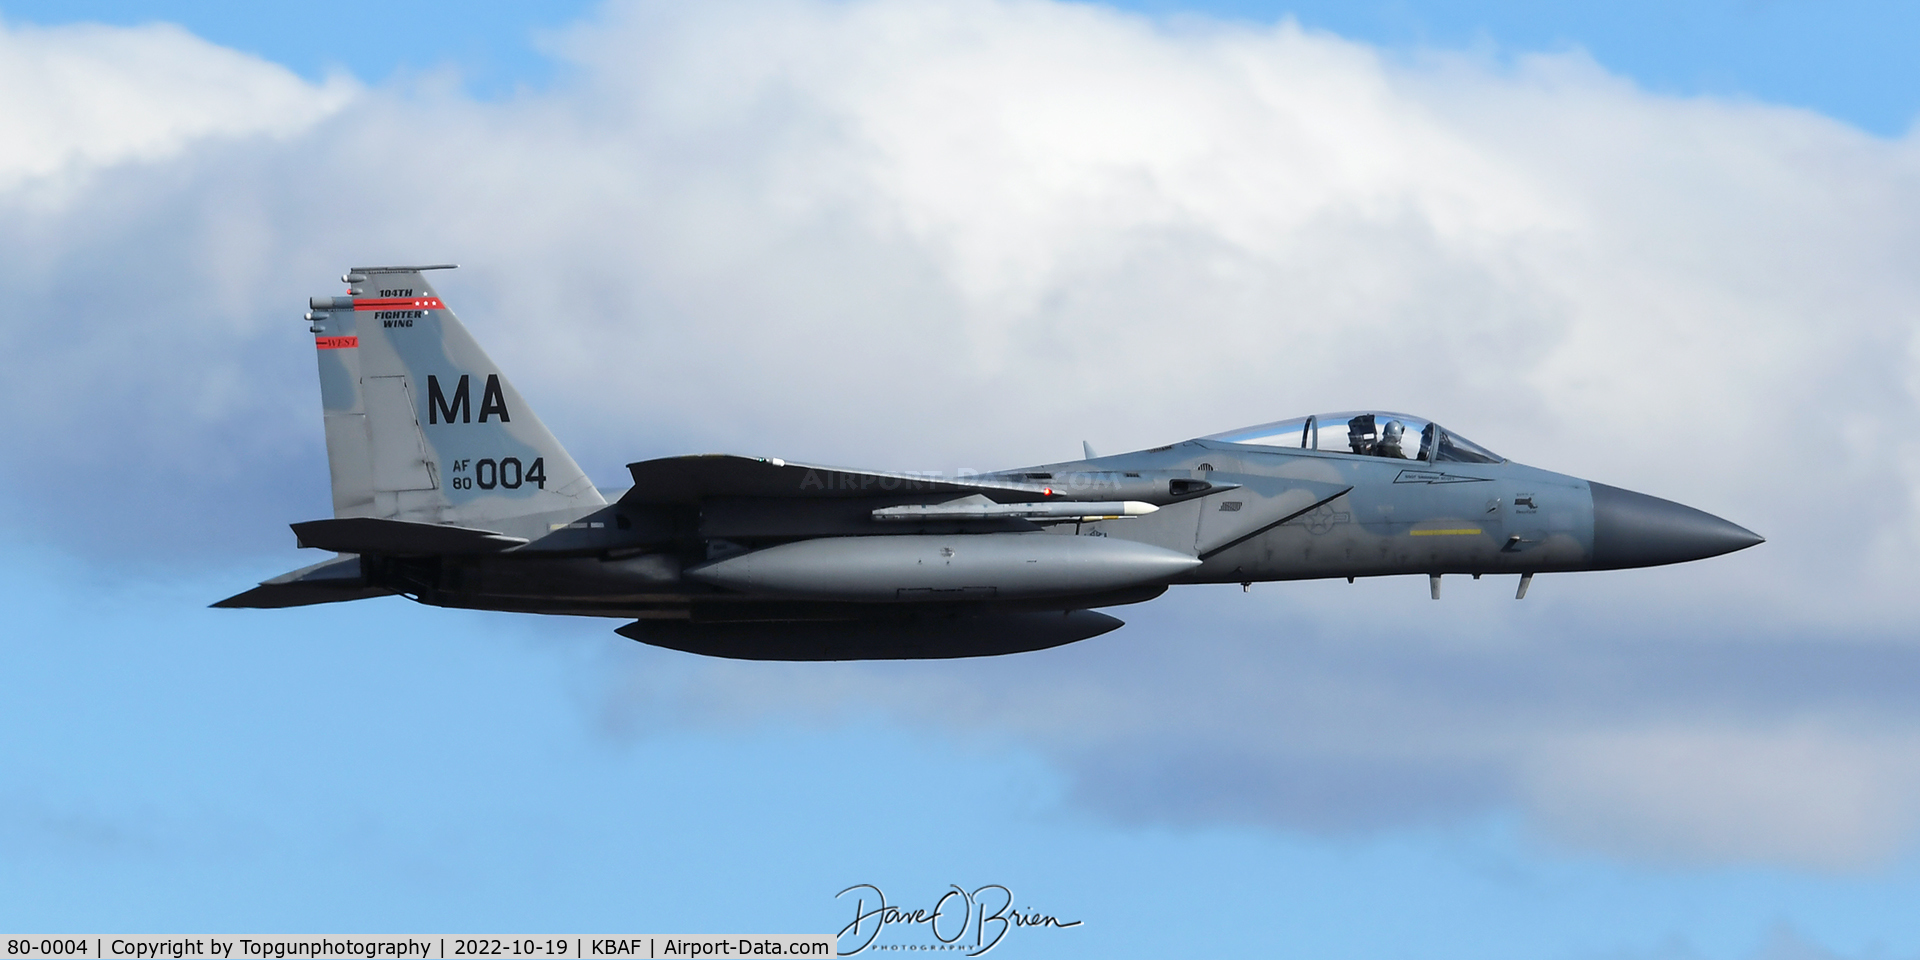 80-0004, 1980 McDonnell Douglas F-15C Eagle C/N 0638/C153, LETHAL13 in the overhead after LETHAL11 had an IFE